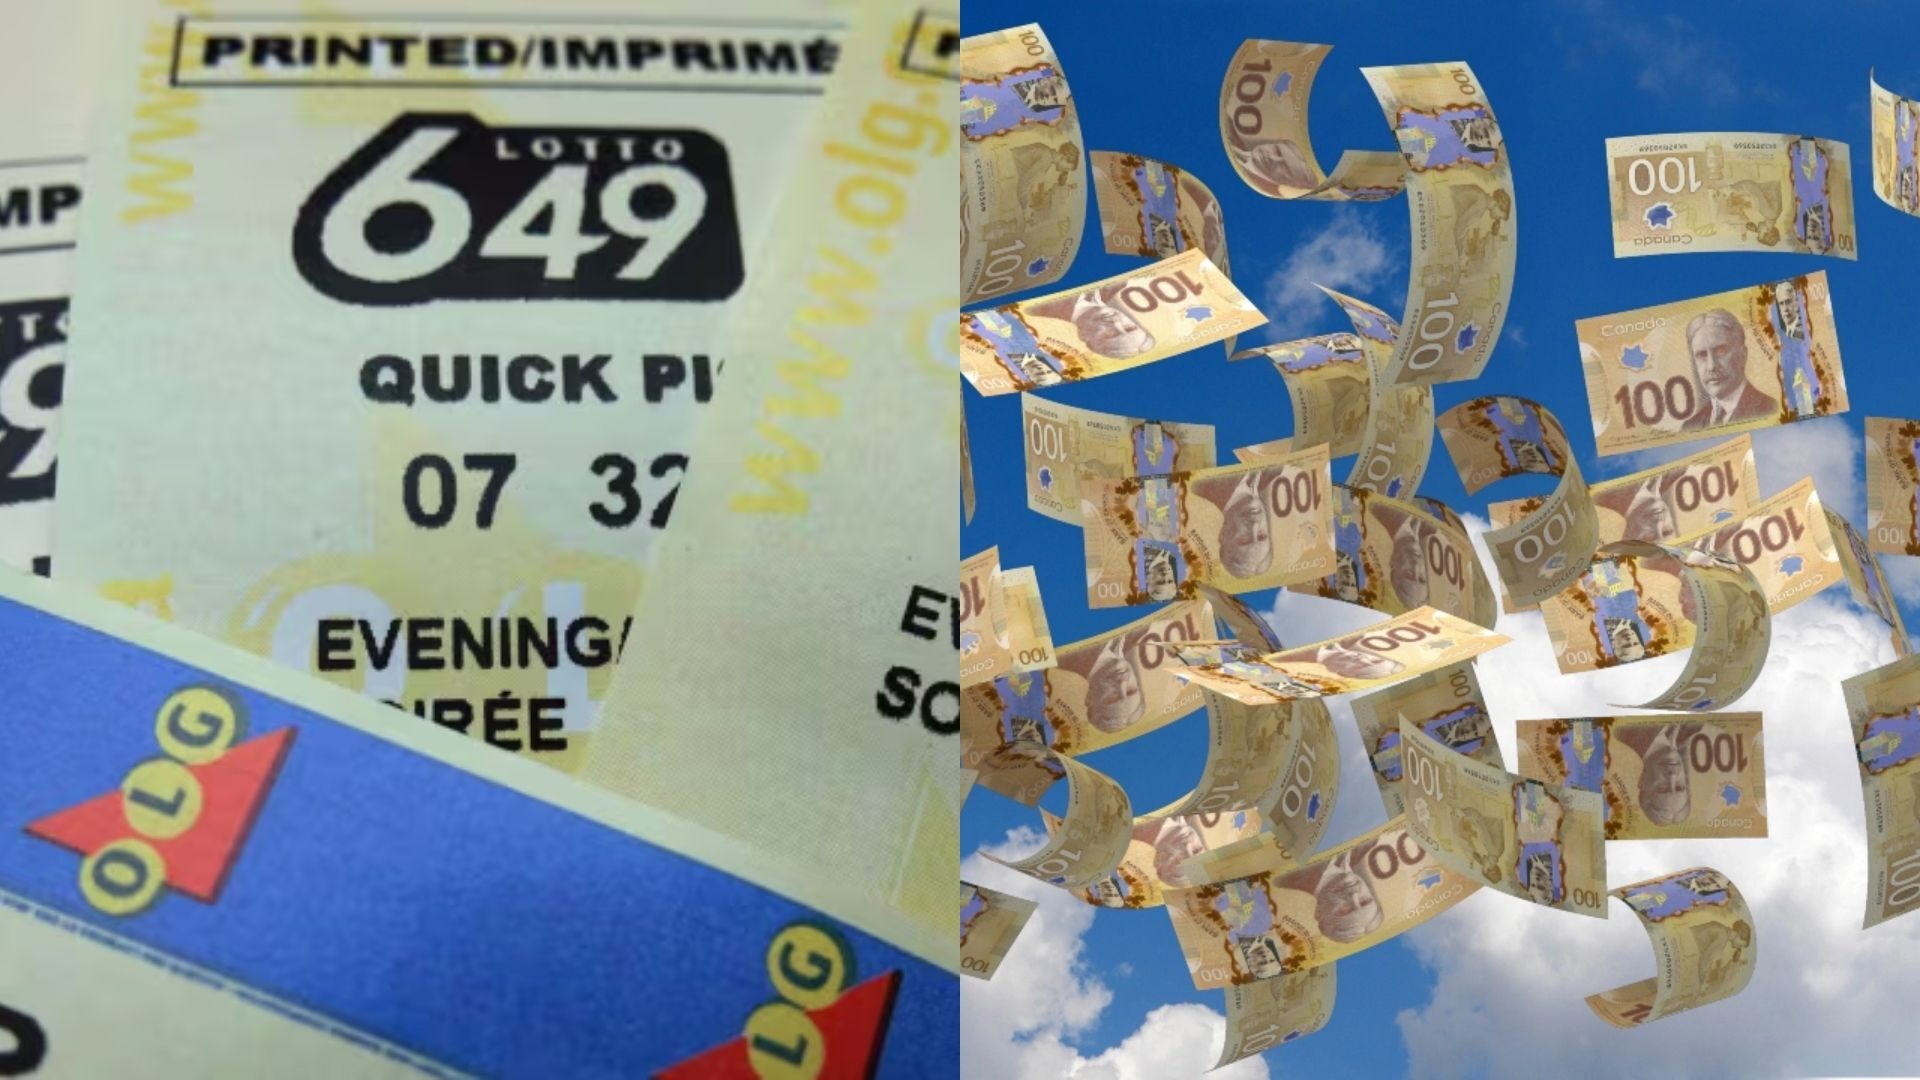 OLG is asking everyone to check their lottery tickets (asap)